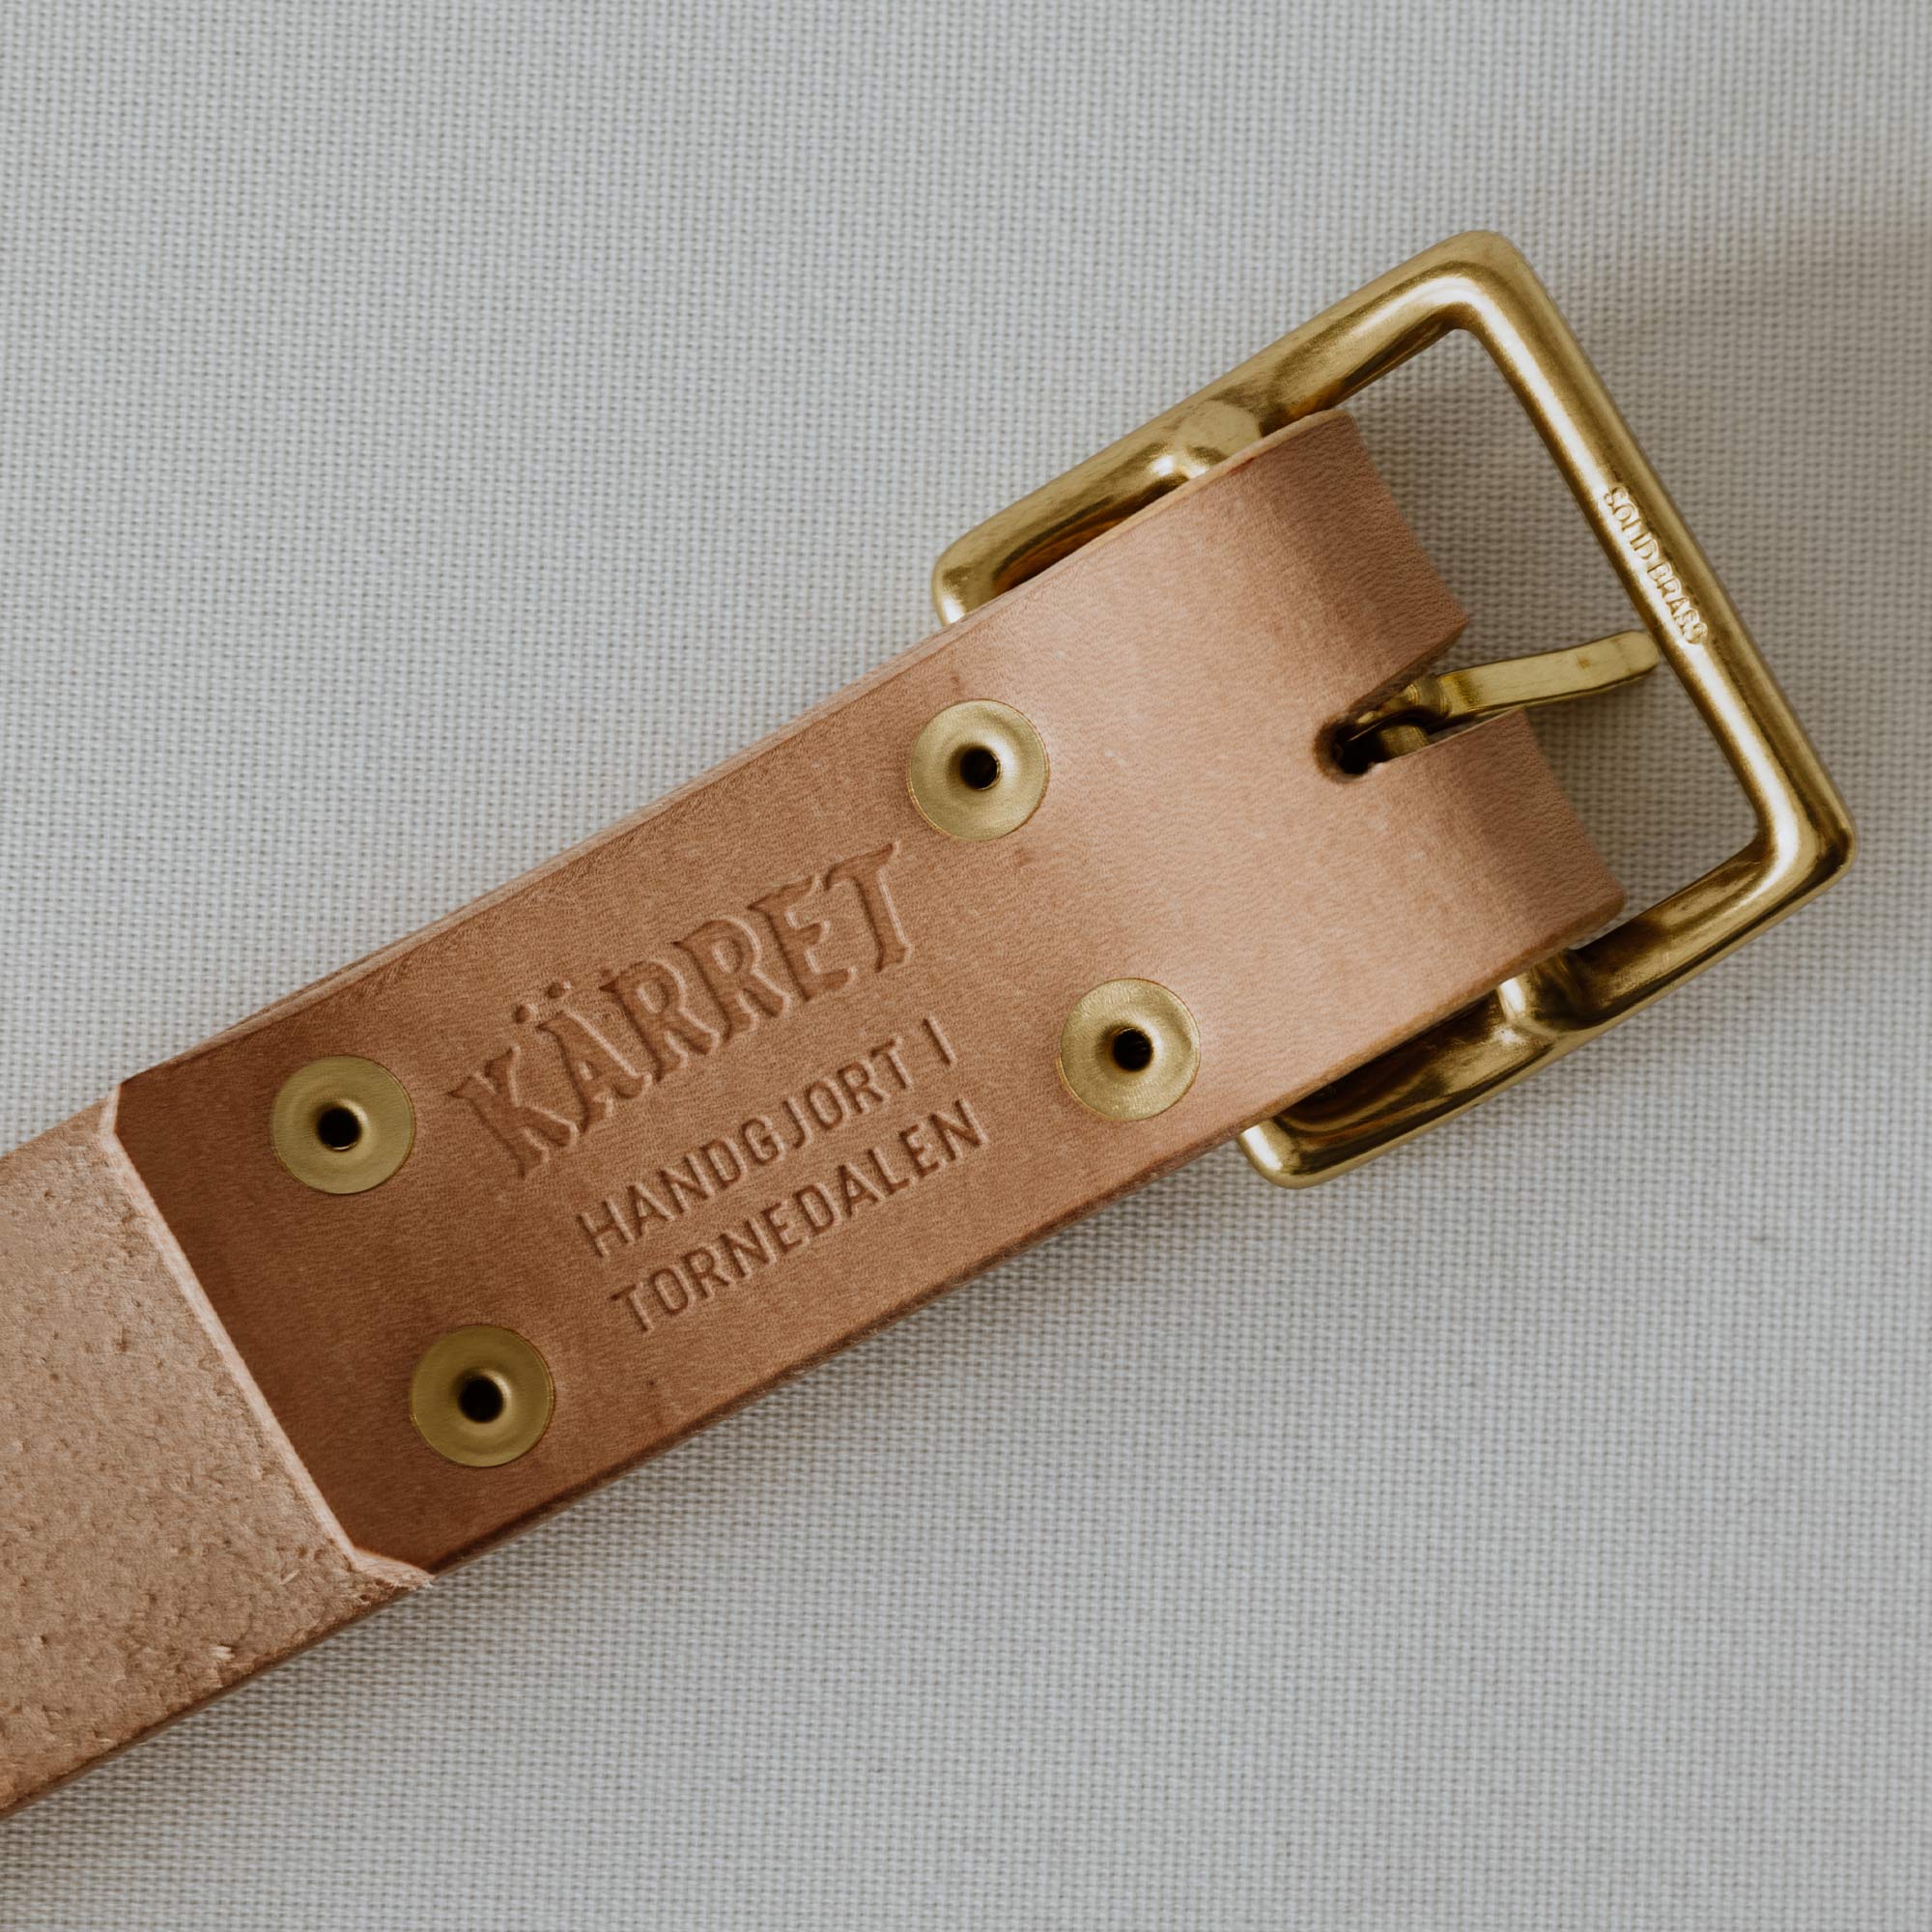 Leather belt (new edition)